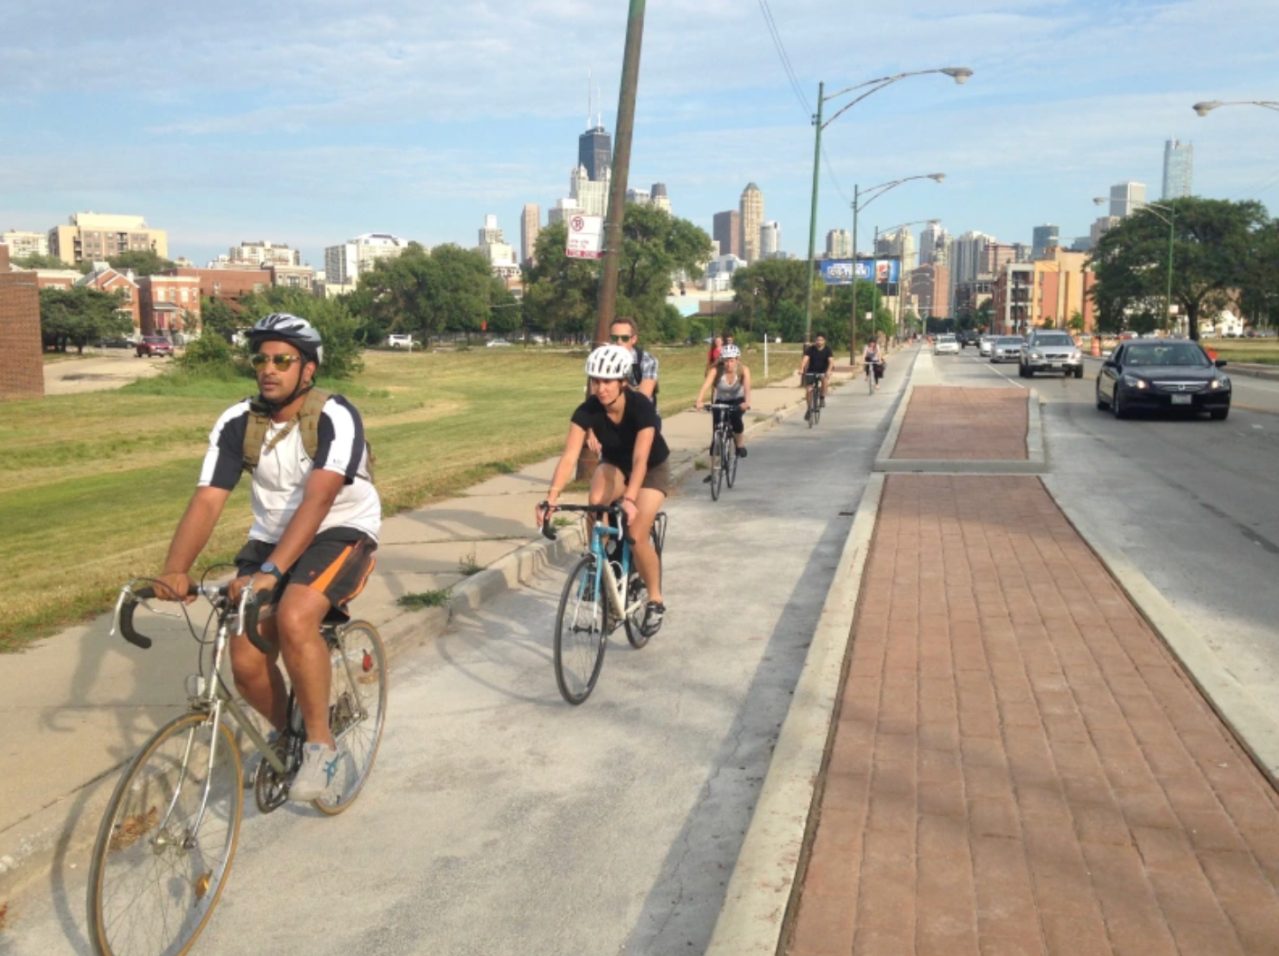 Concrete-protected bike lanes on Clybourn Avenue in Old Town. Photo: John Greenfield